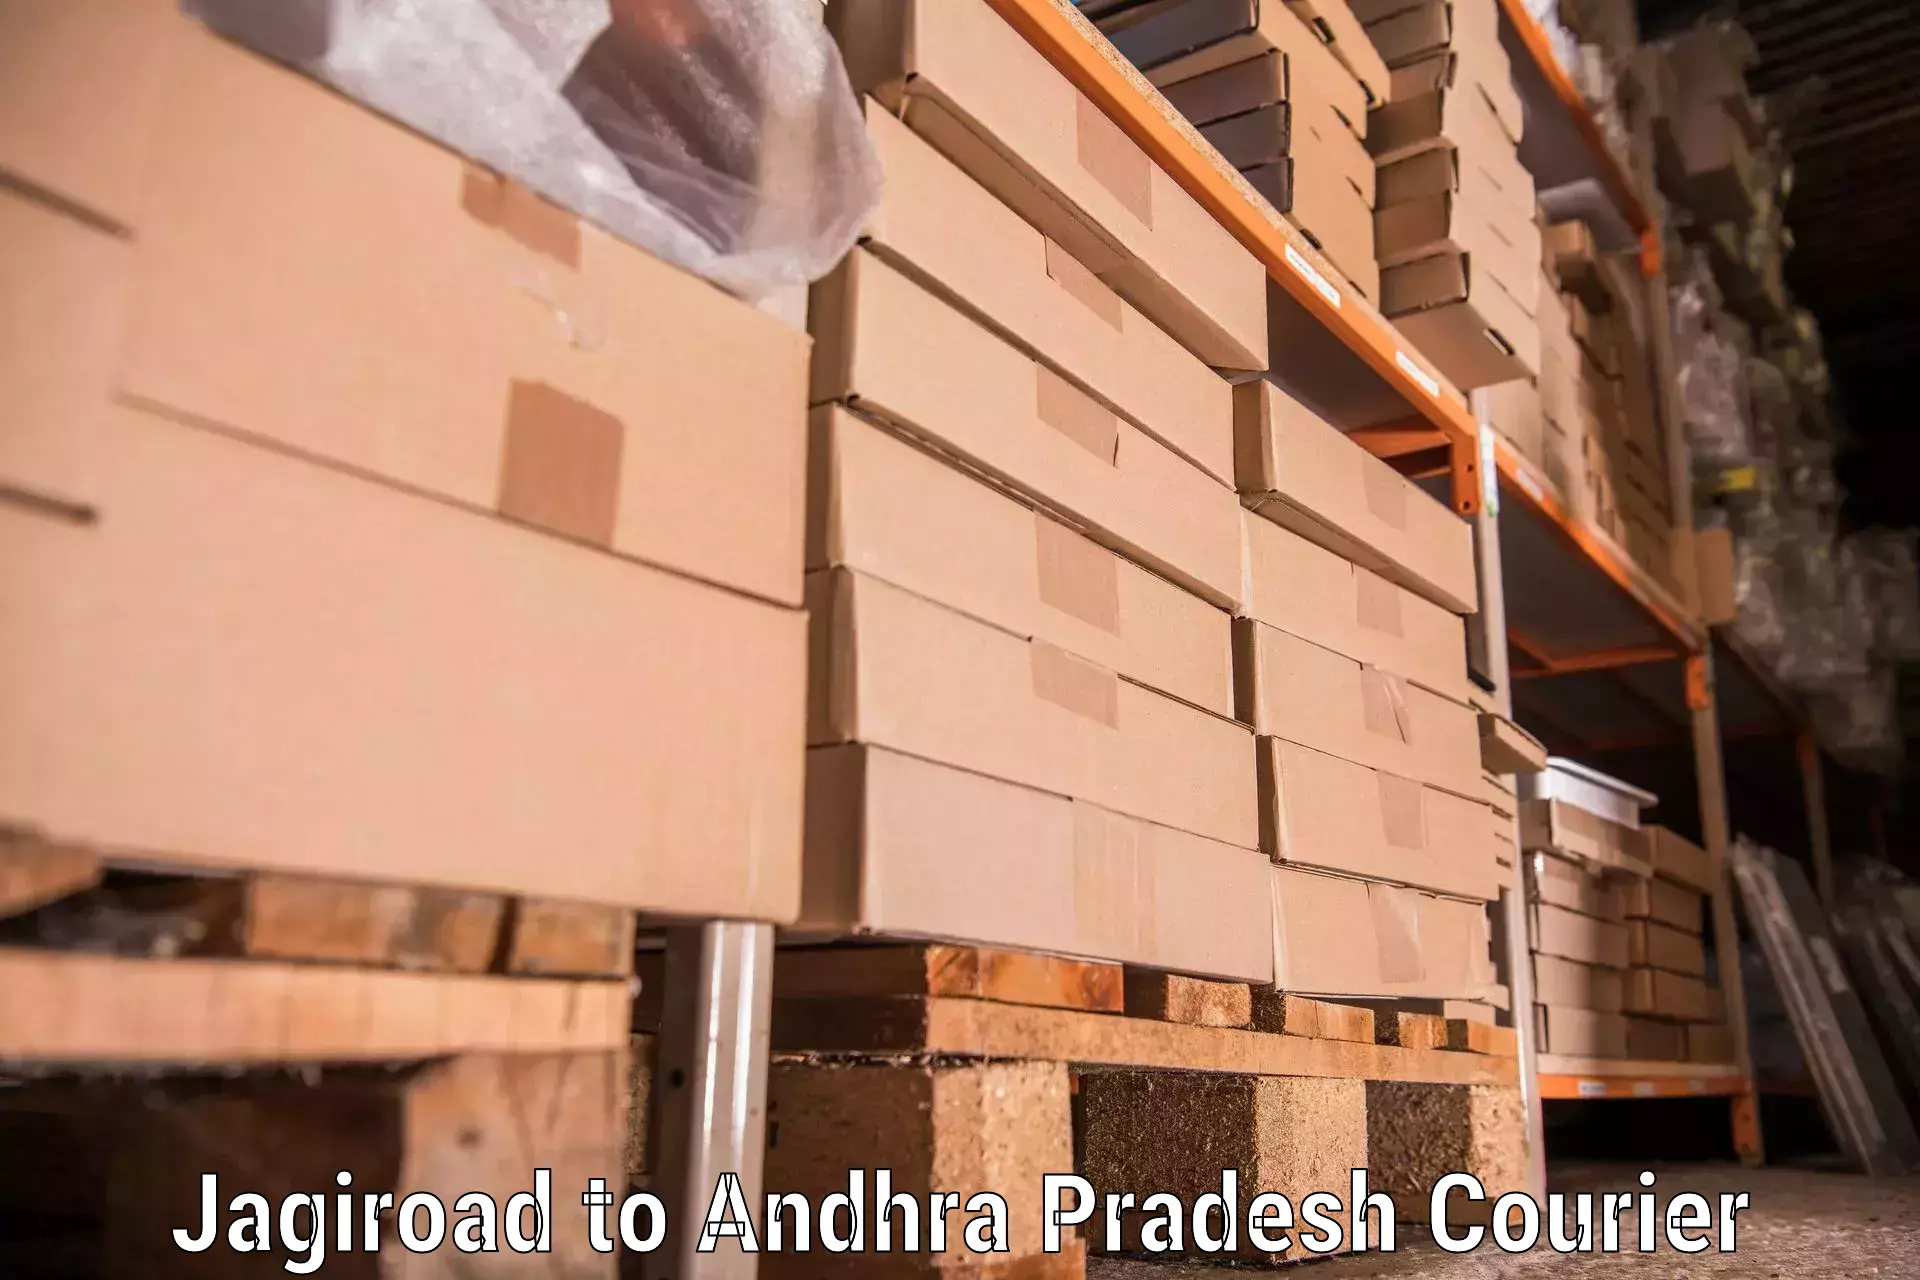 Hassle-free relocation Jagiroad to Tripuranthakam